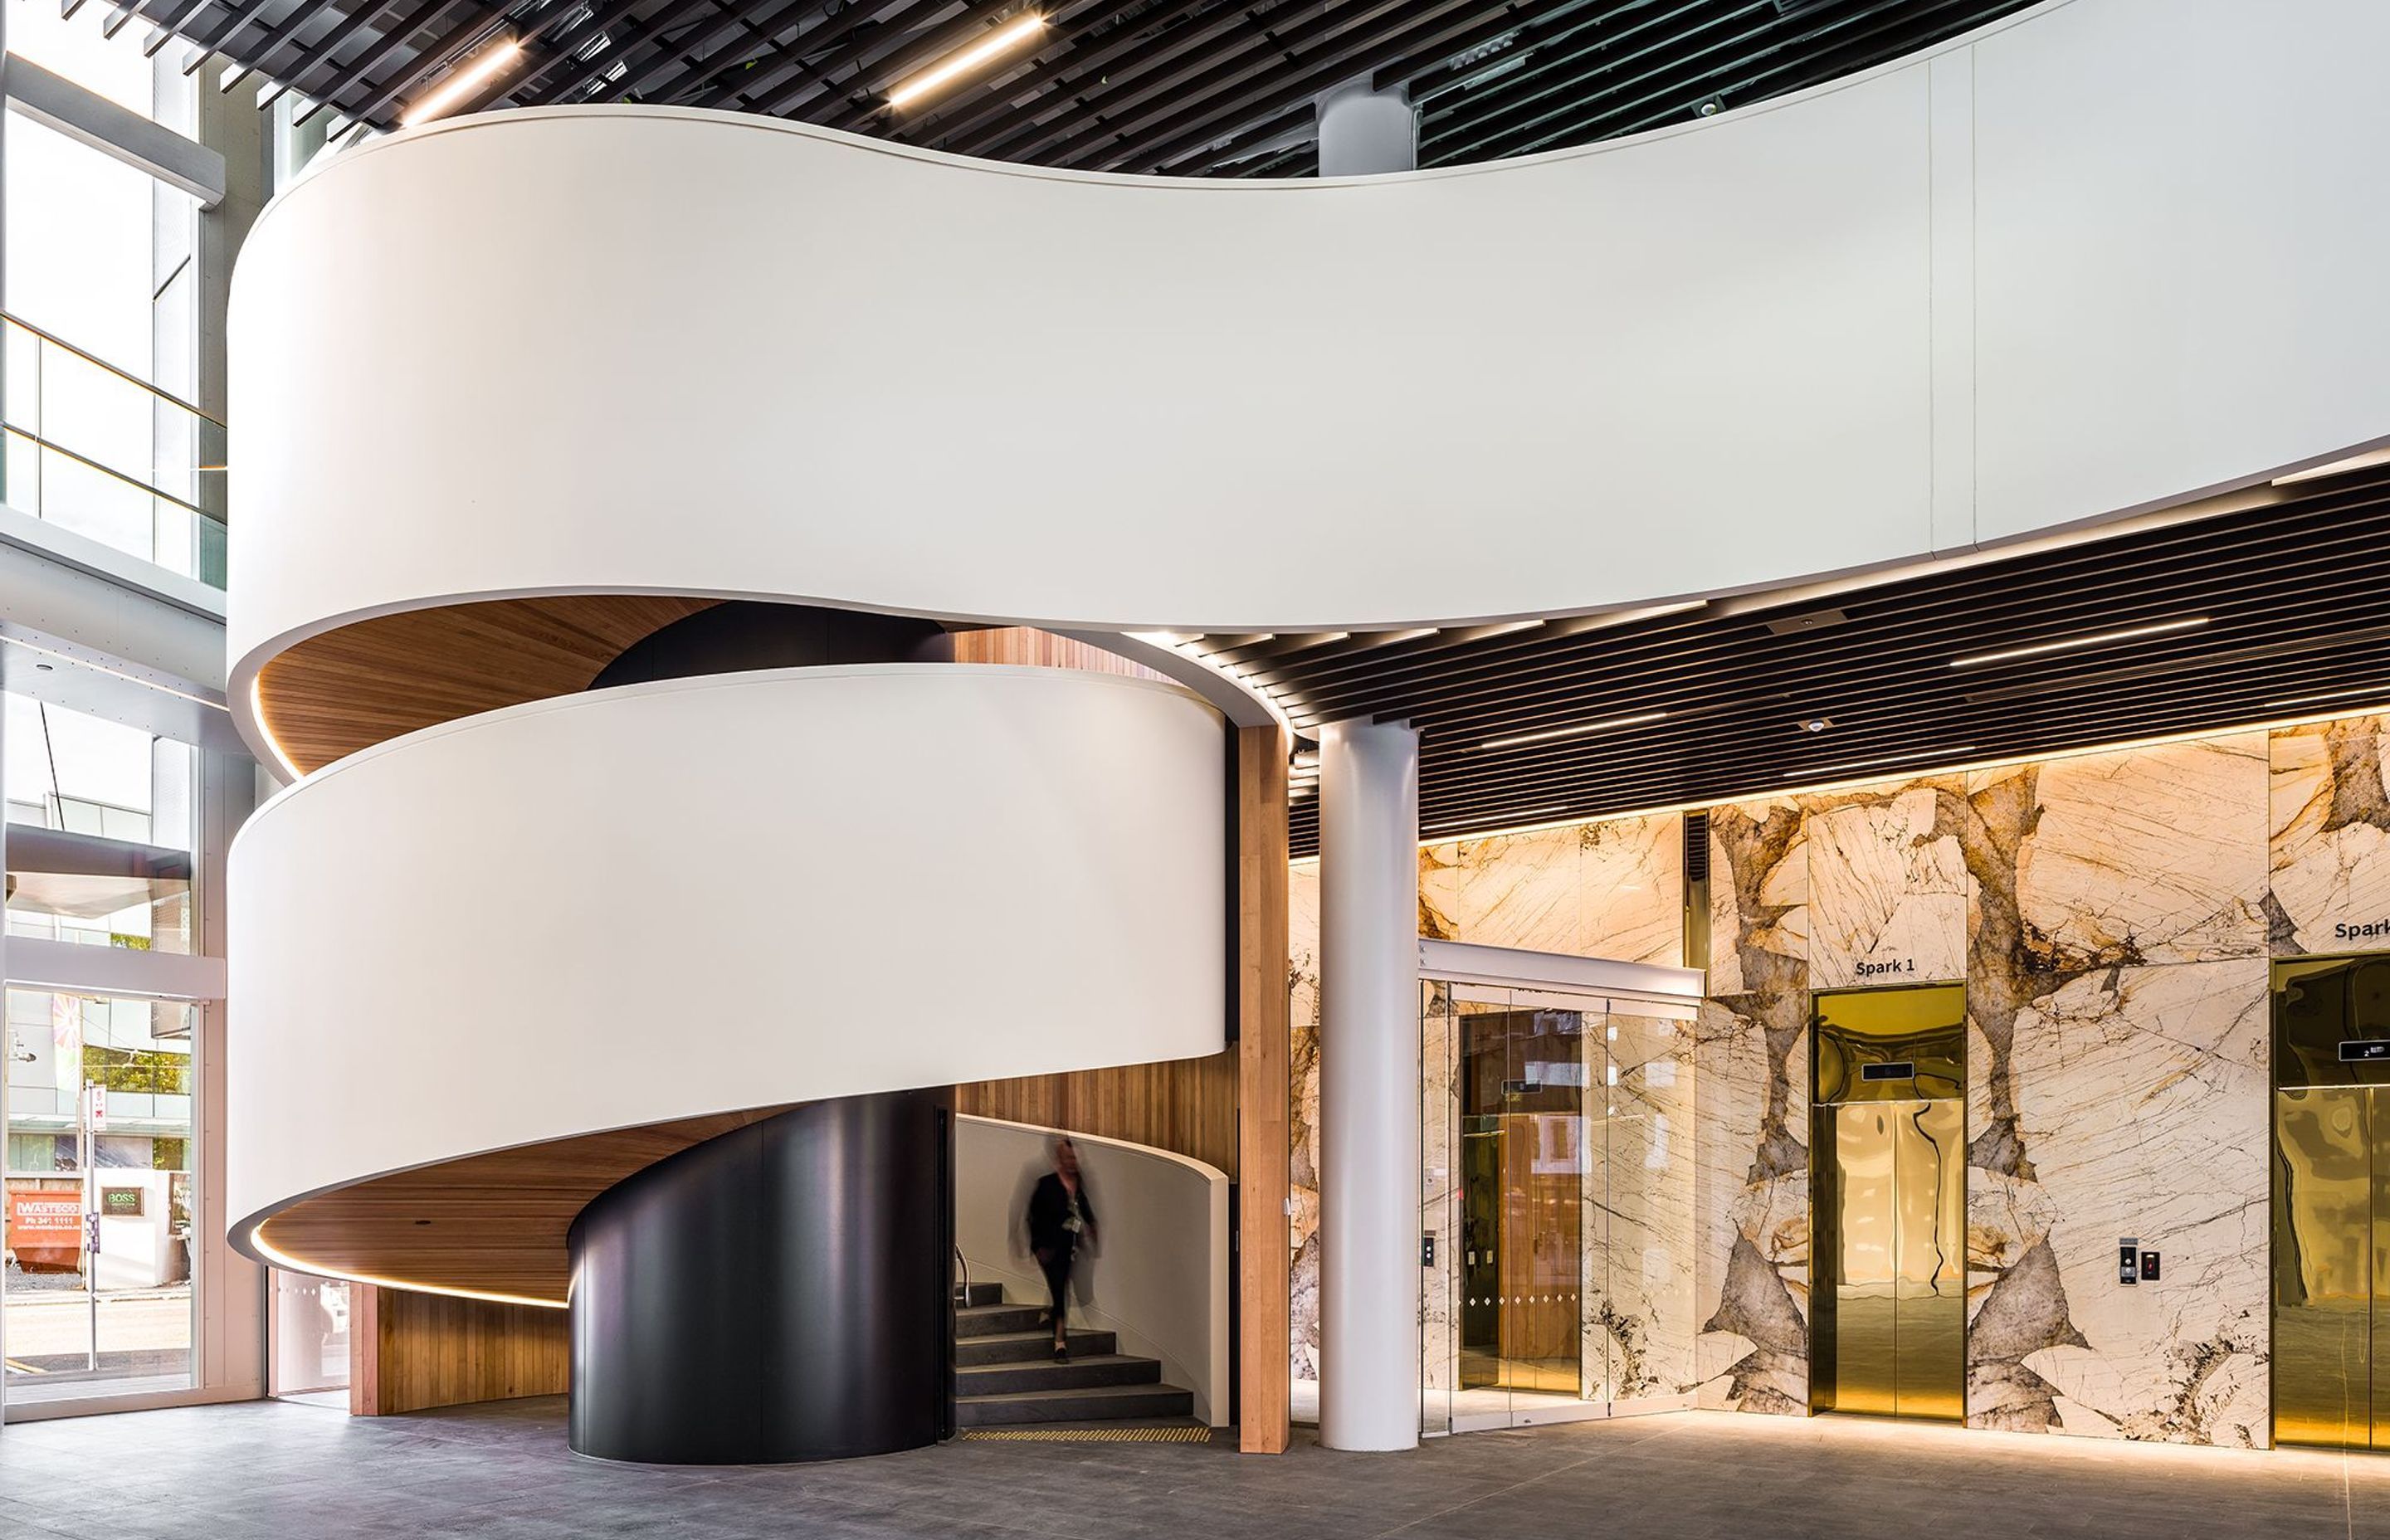 “The ribbon staircase is a thing of beauty as it curves through the space, creating a sculptural effect" – Jasper van der Lingen, Sheppard &amp; Rout Architects.